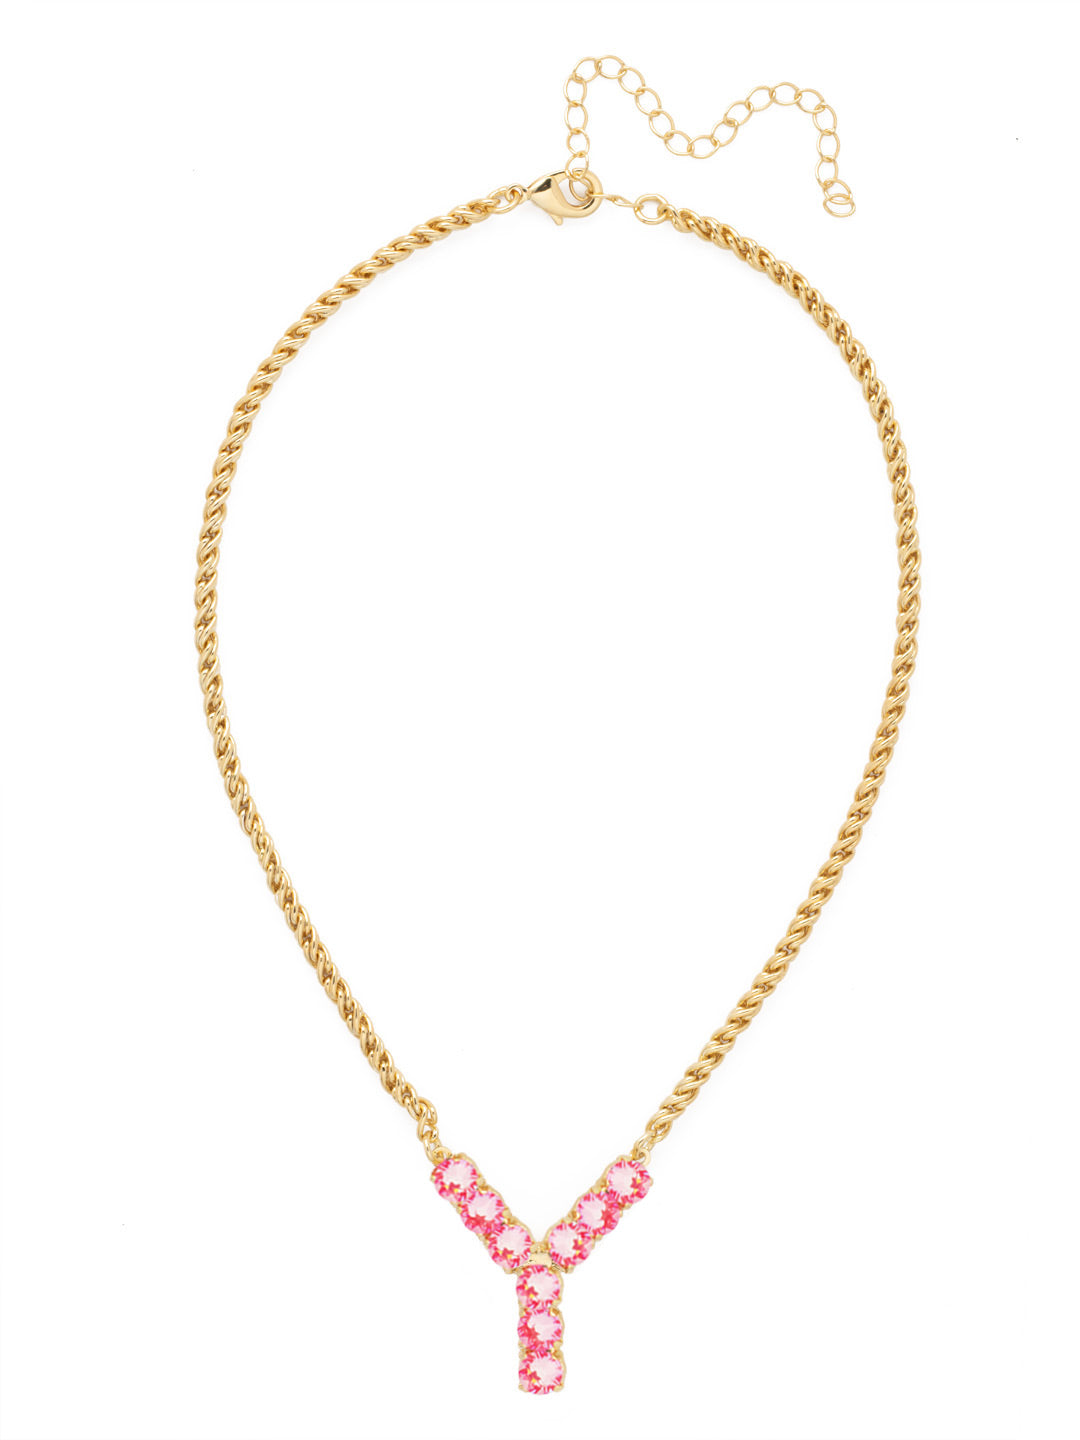 Y Initial Rope Pendant Necklace - NFK44BGETP - <p>The Initial Rope Pendant Necklace features a crystal encrusted metal monogram pendant on an adjustable rope chain, secured with a lobster claw clasp. From Sorrelli's Electric Pink collection in our Bright Gold-tone finish.</p>